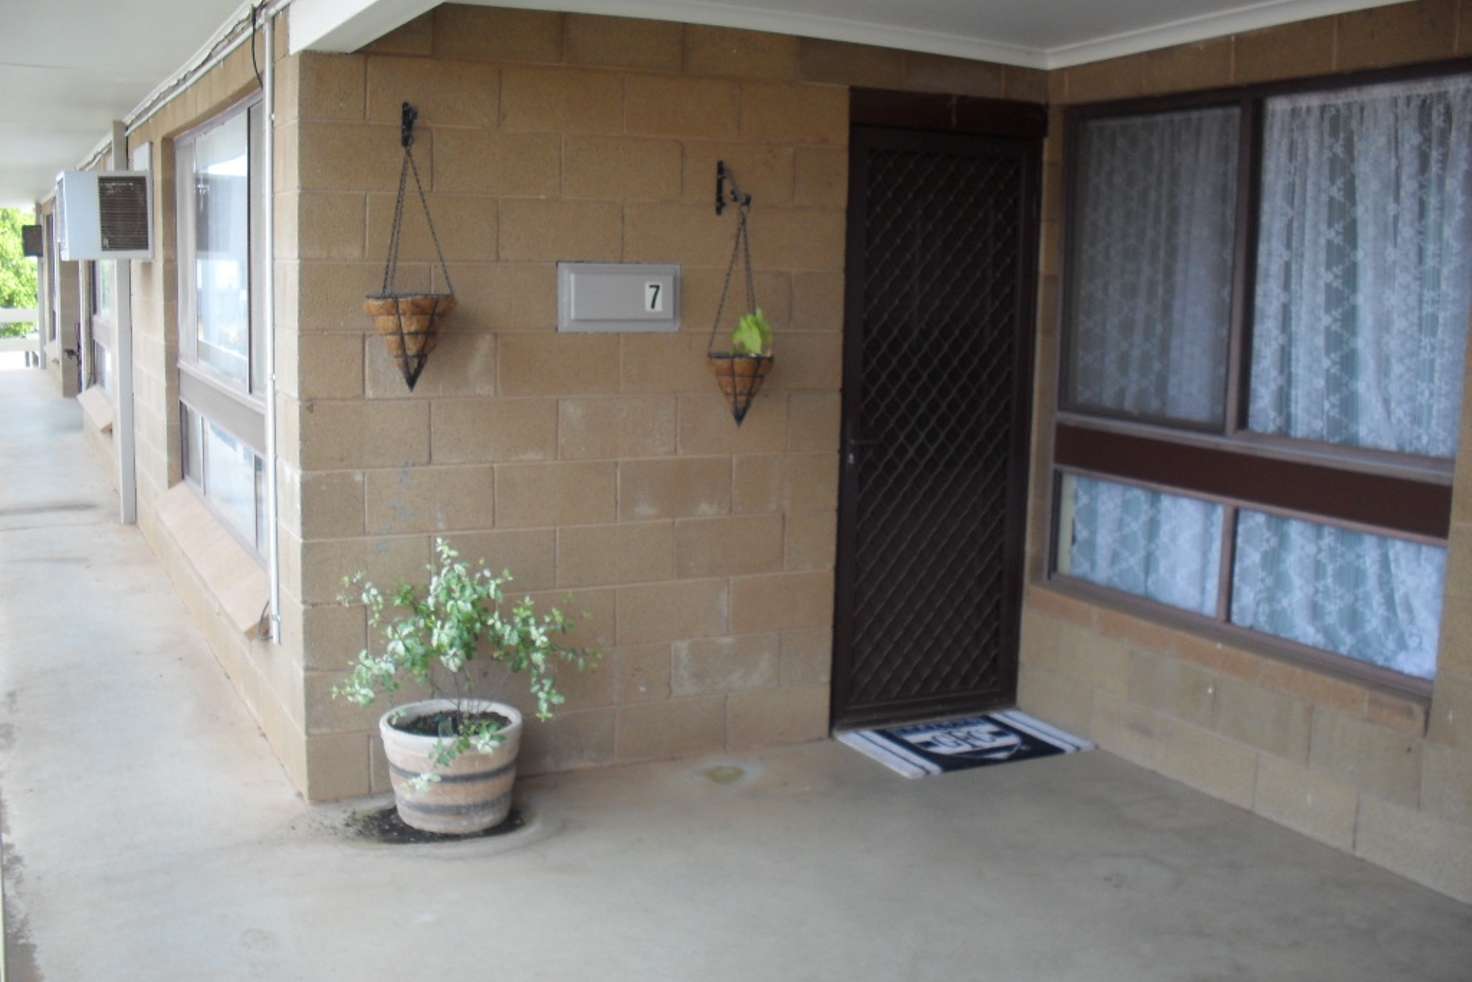 Main view of Homely unit listing, 7/38 Kurrajong Ave, Leeton NSW 2705